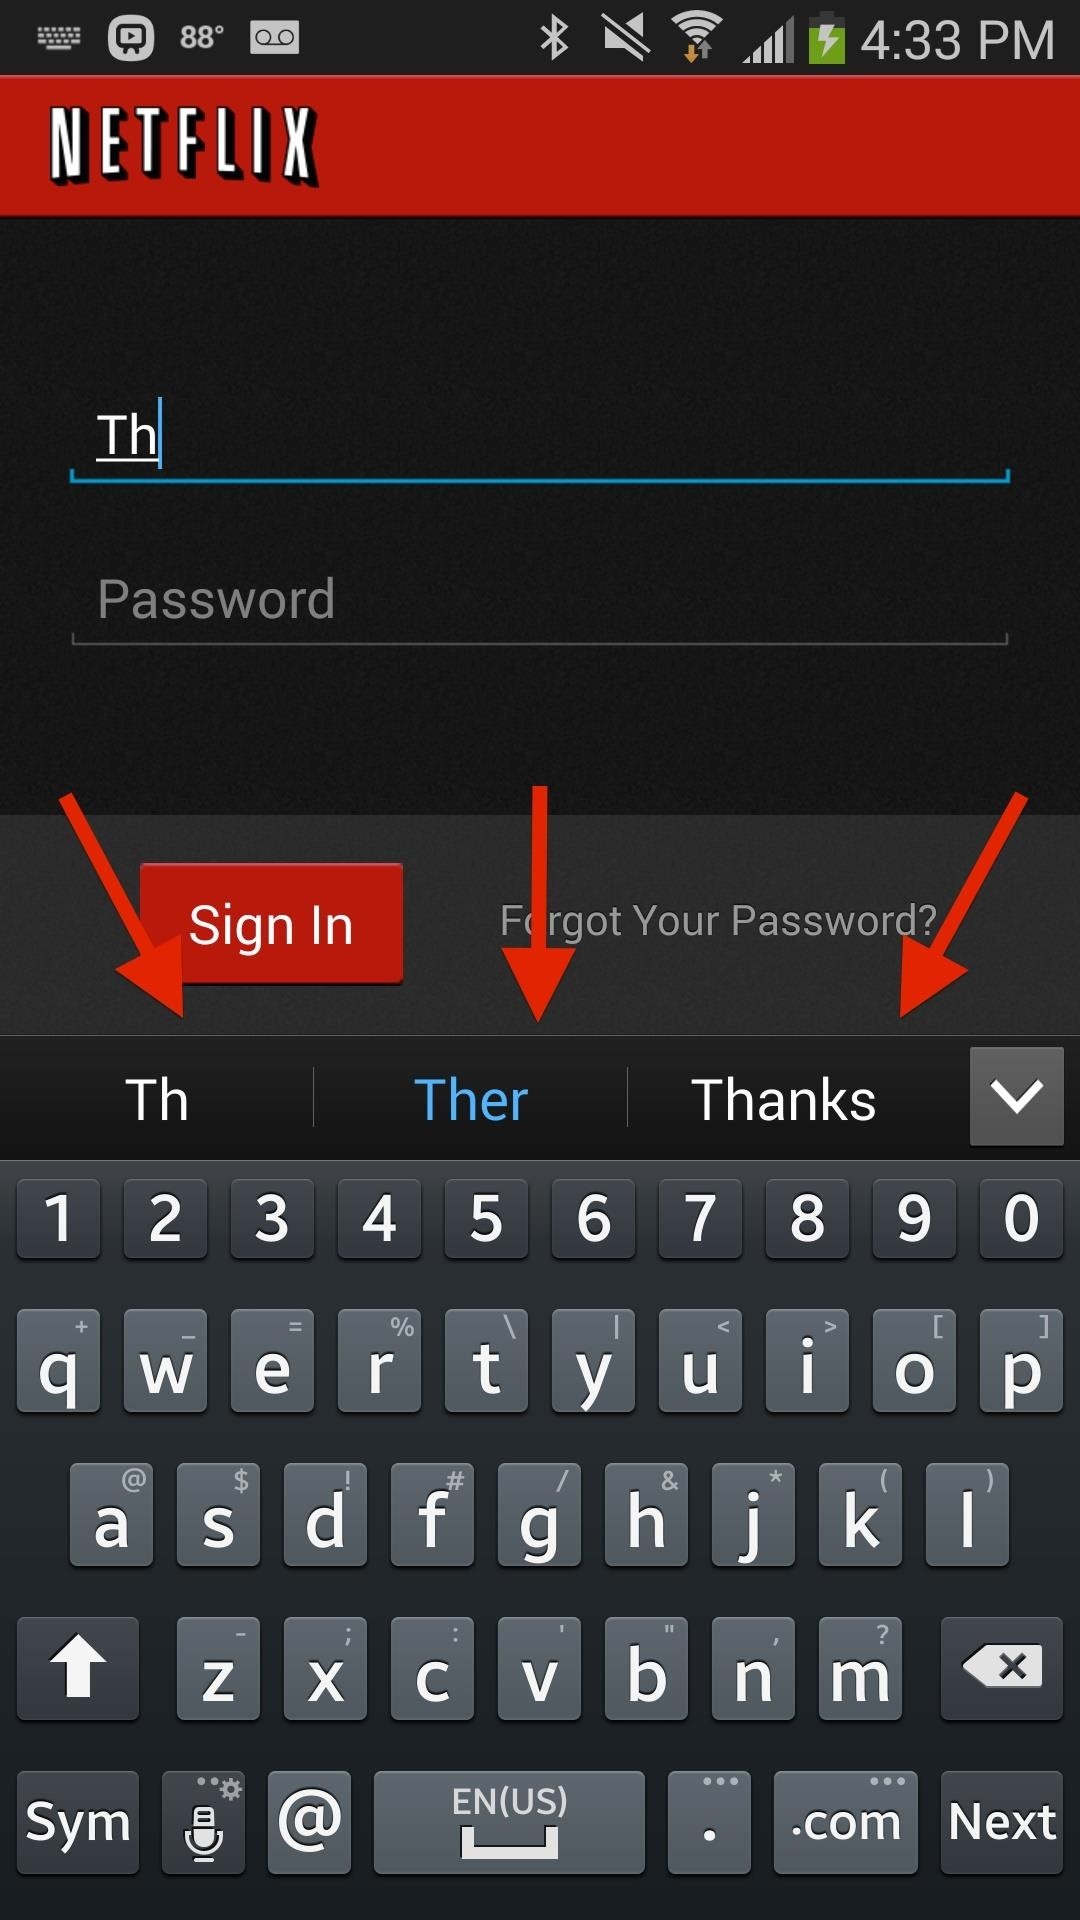 How to Enable Autocorrect & Predictions in Any Text Field on Your Galaxy Note 3